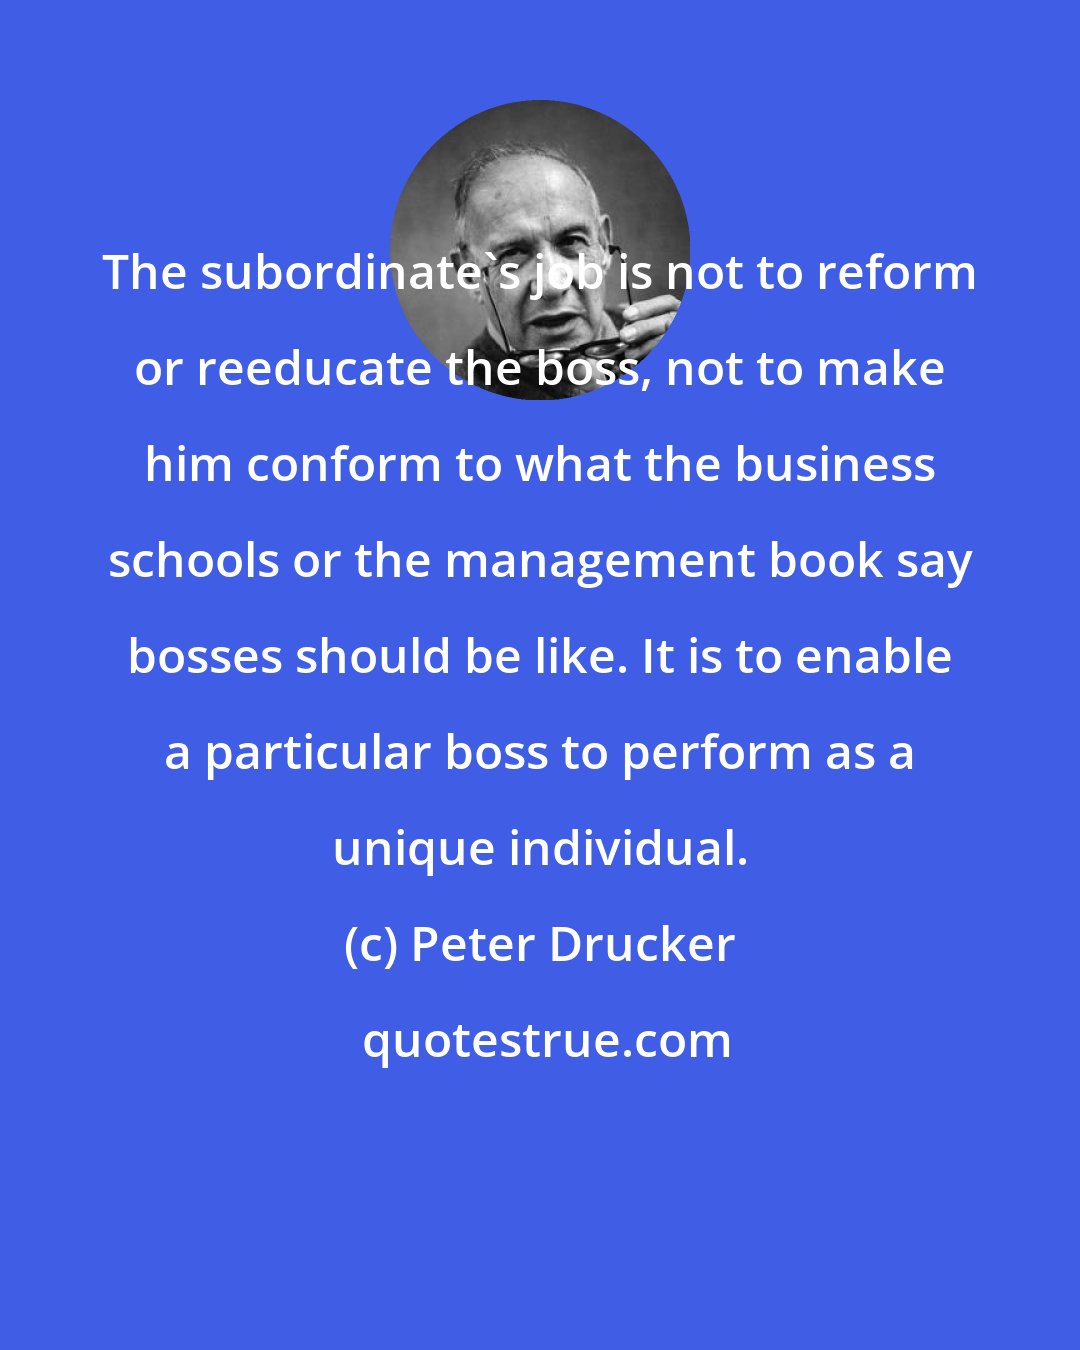 Peter Drucker: The subordinate's job is not to reform or reeducate the boss, not to make him conform to what the business schools or the management book say bosses should be like. It is to enable a particular boss to perform as a unique individual.